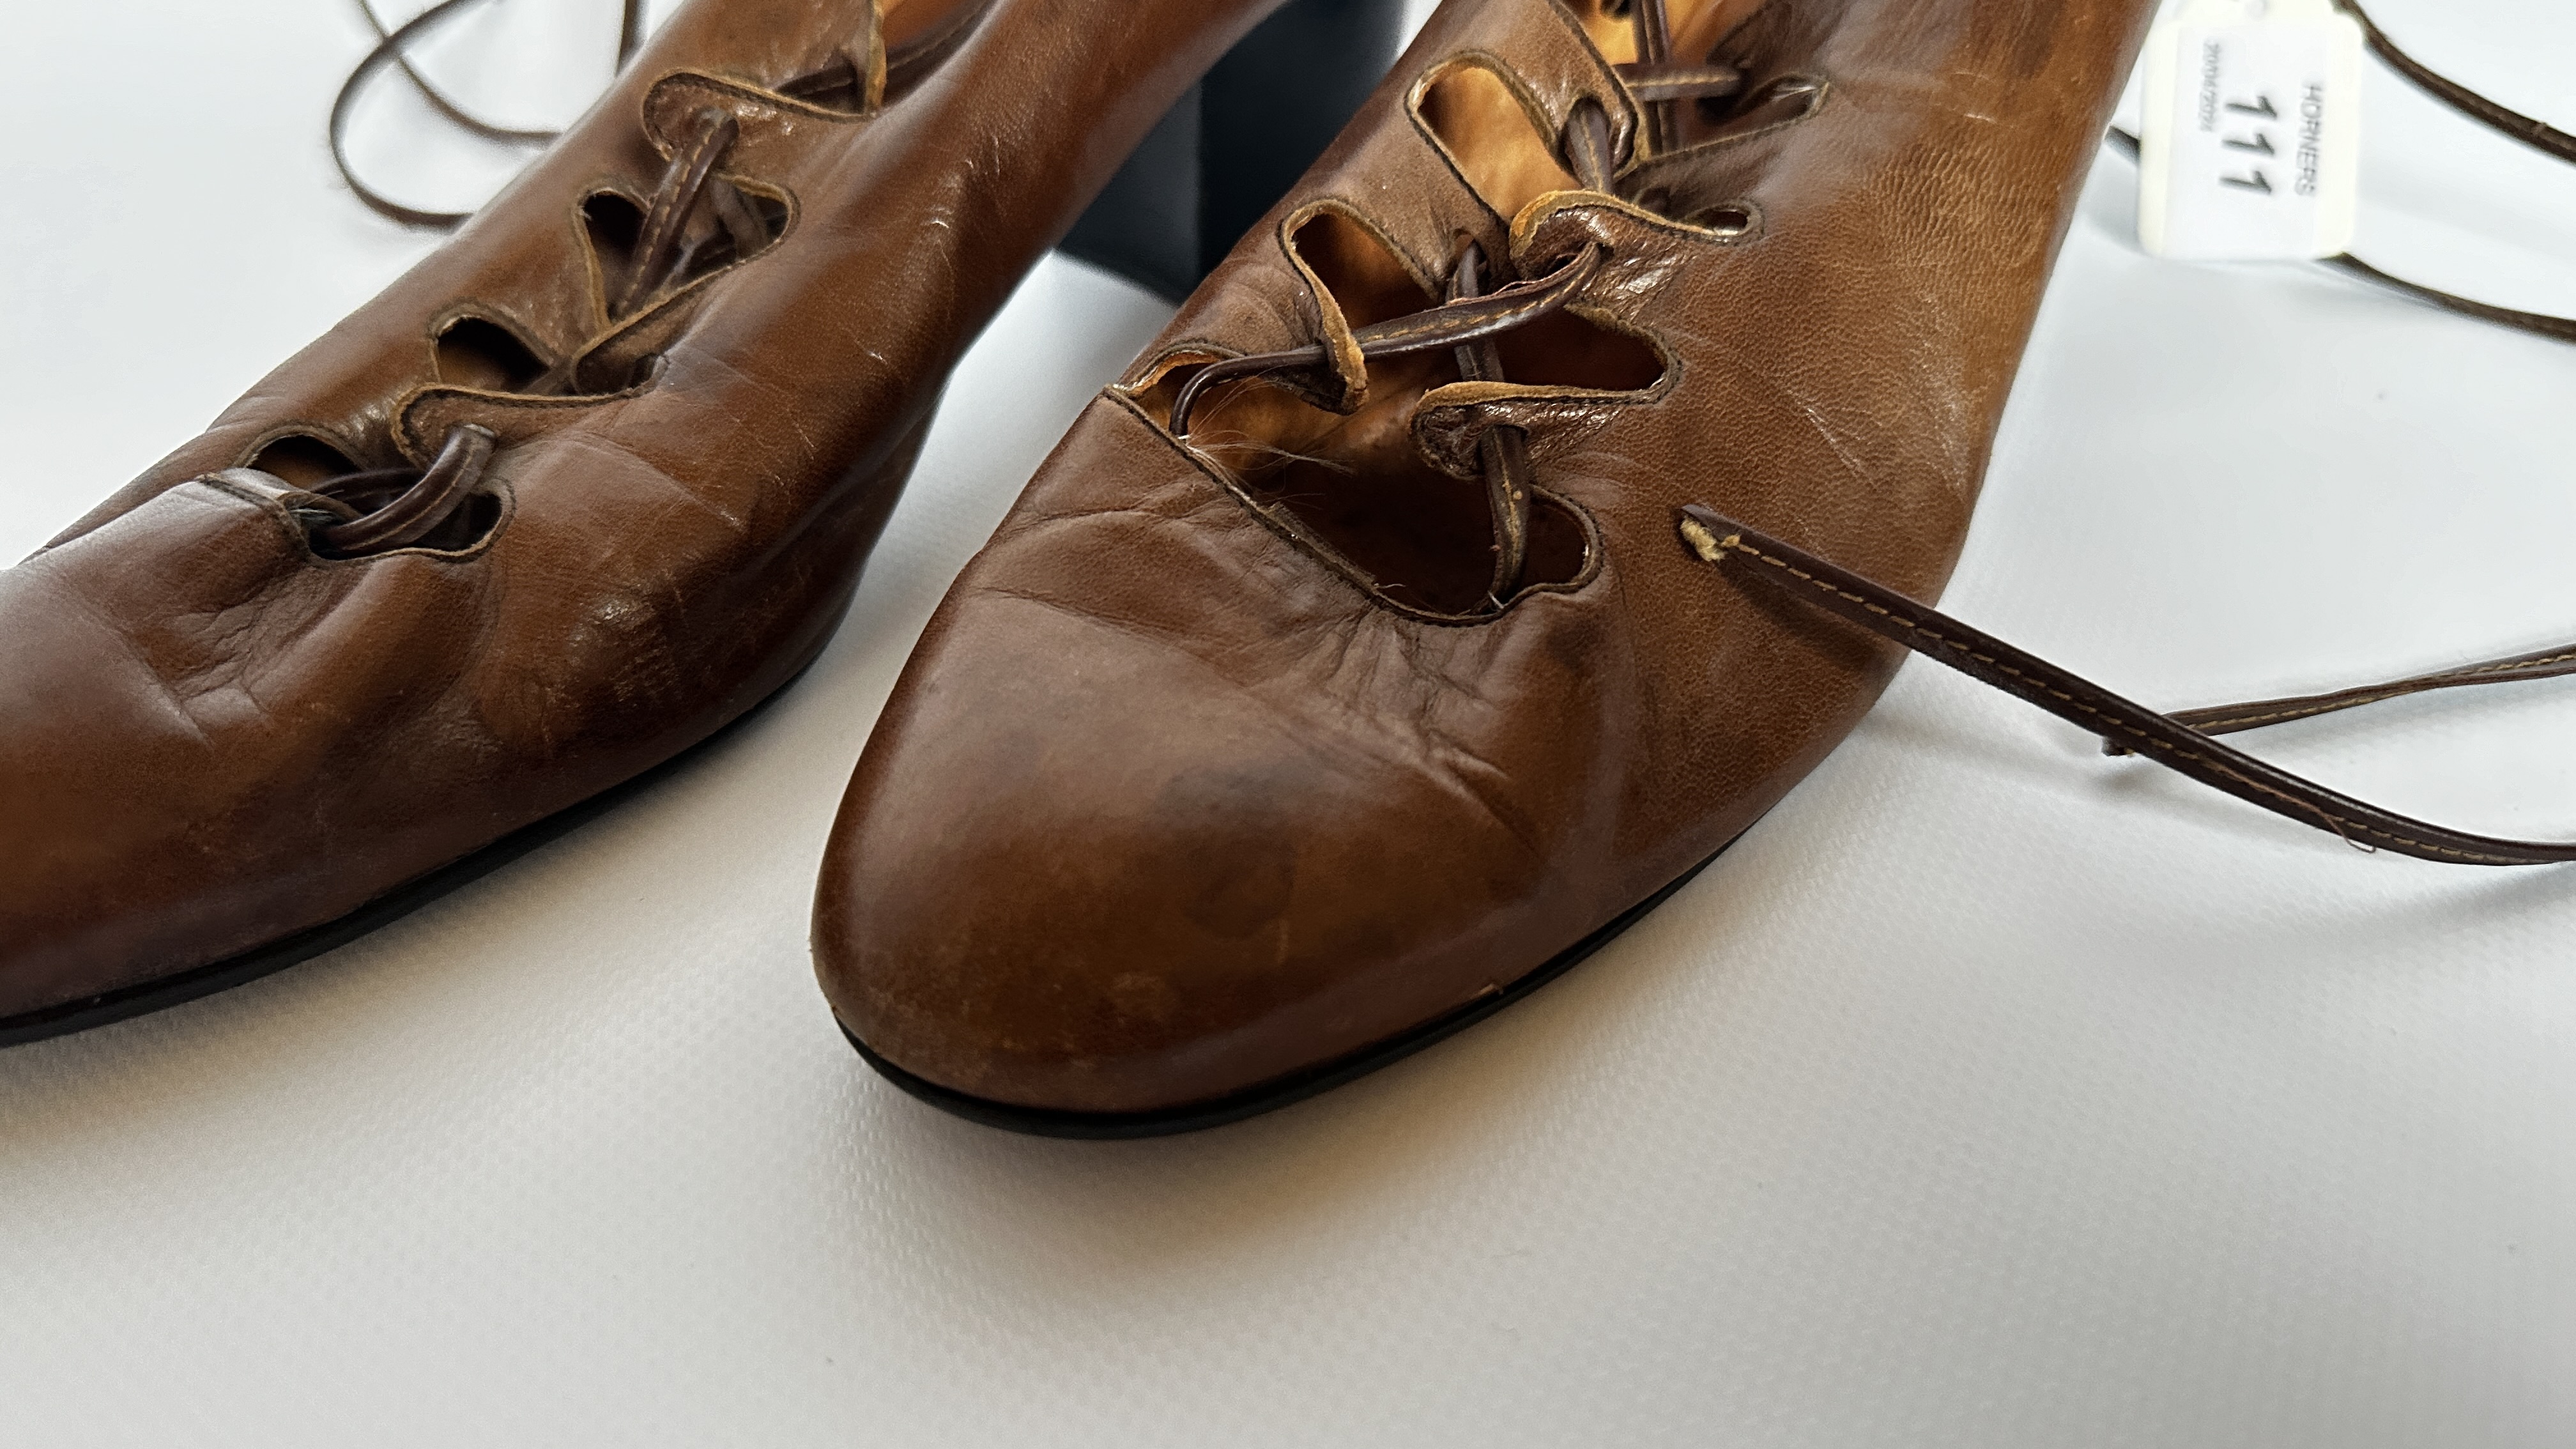 1 PAIR OF LADY'S SHOES - 'BIBA' TAN LEATHER WITH LONG LACES - A/F CONDITION, SOLD AS SEEN. - Image 3 of 14